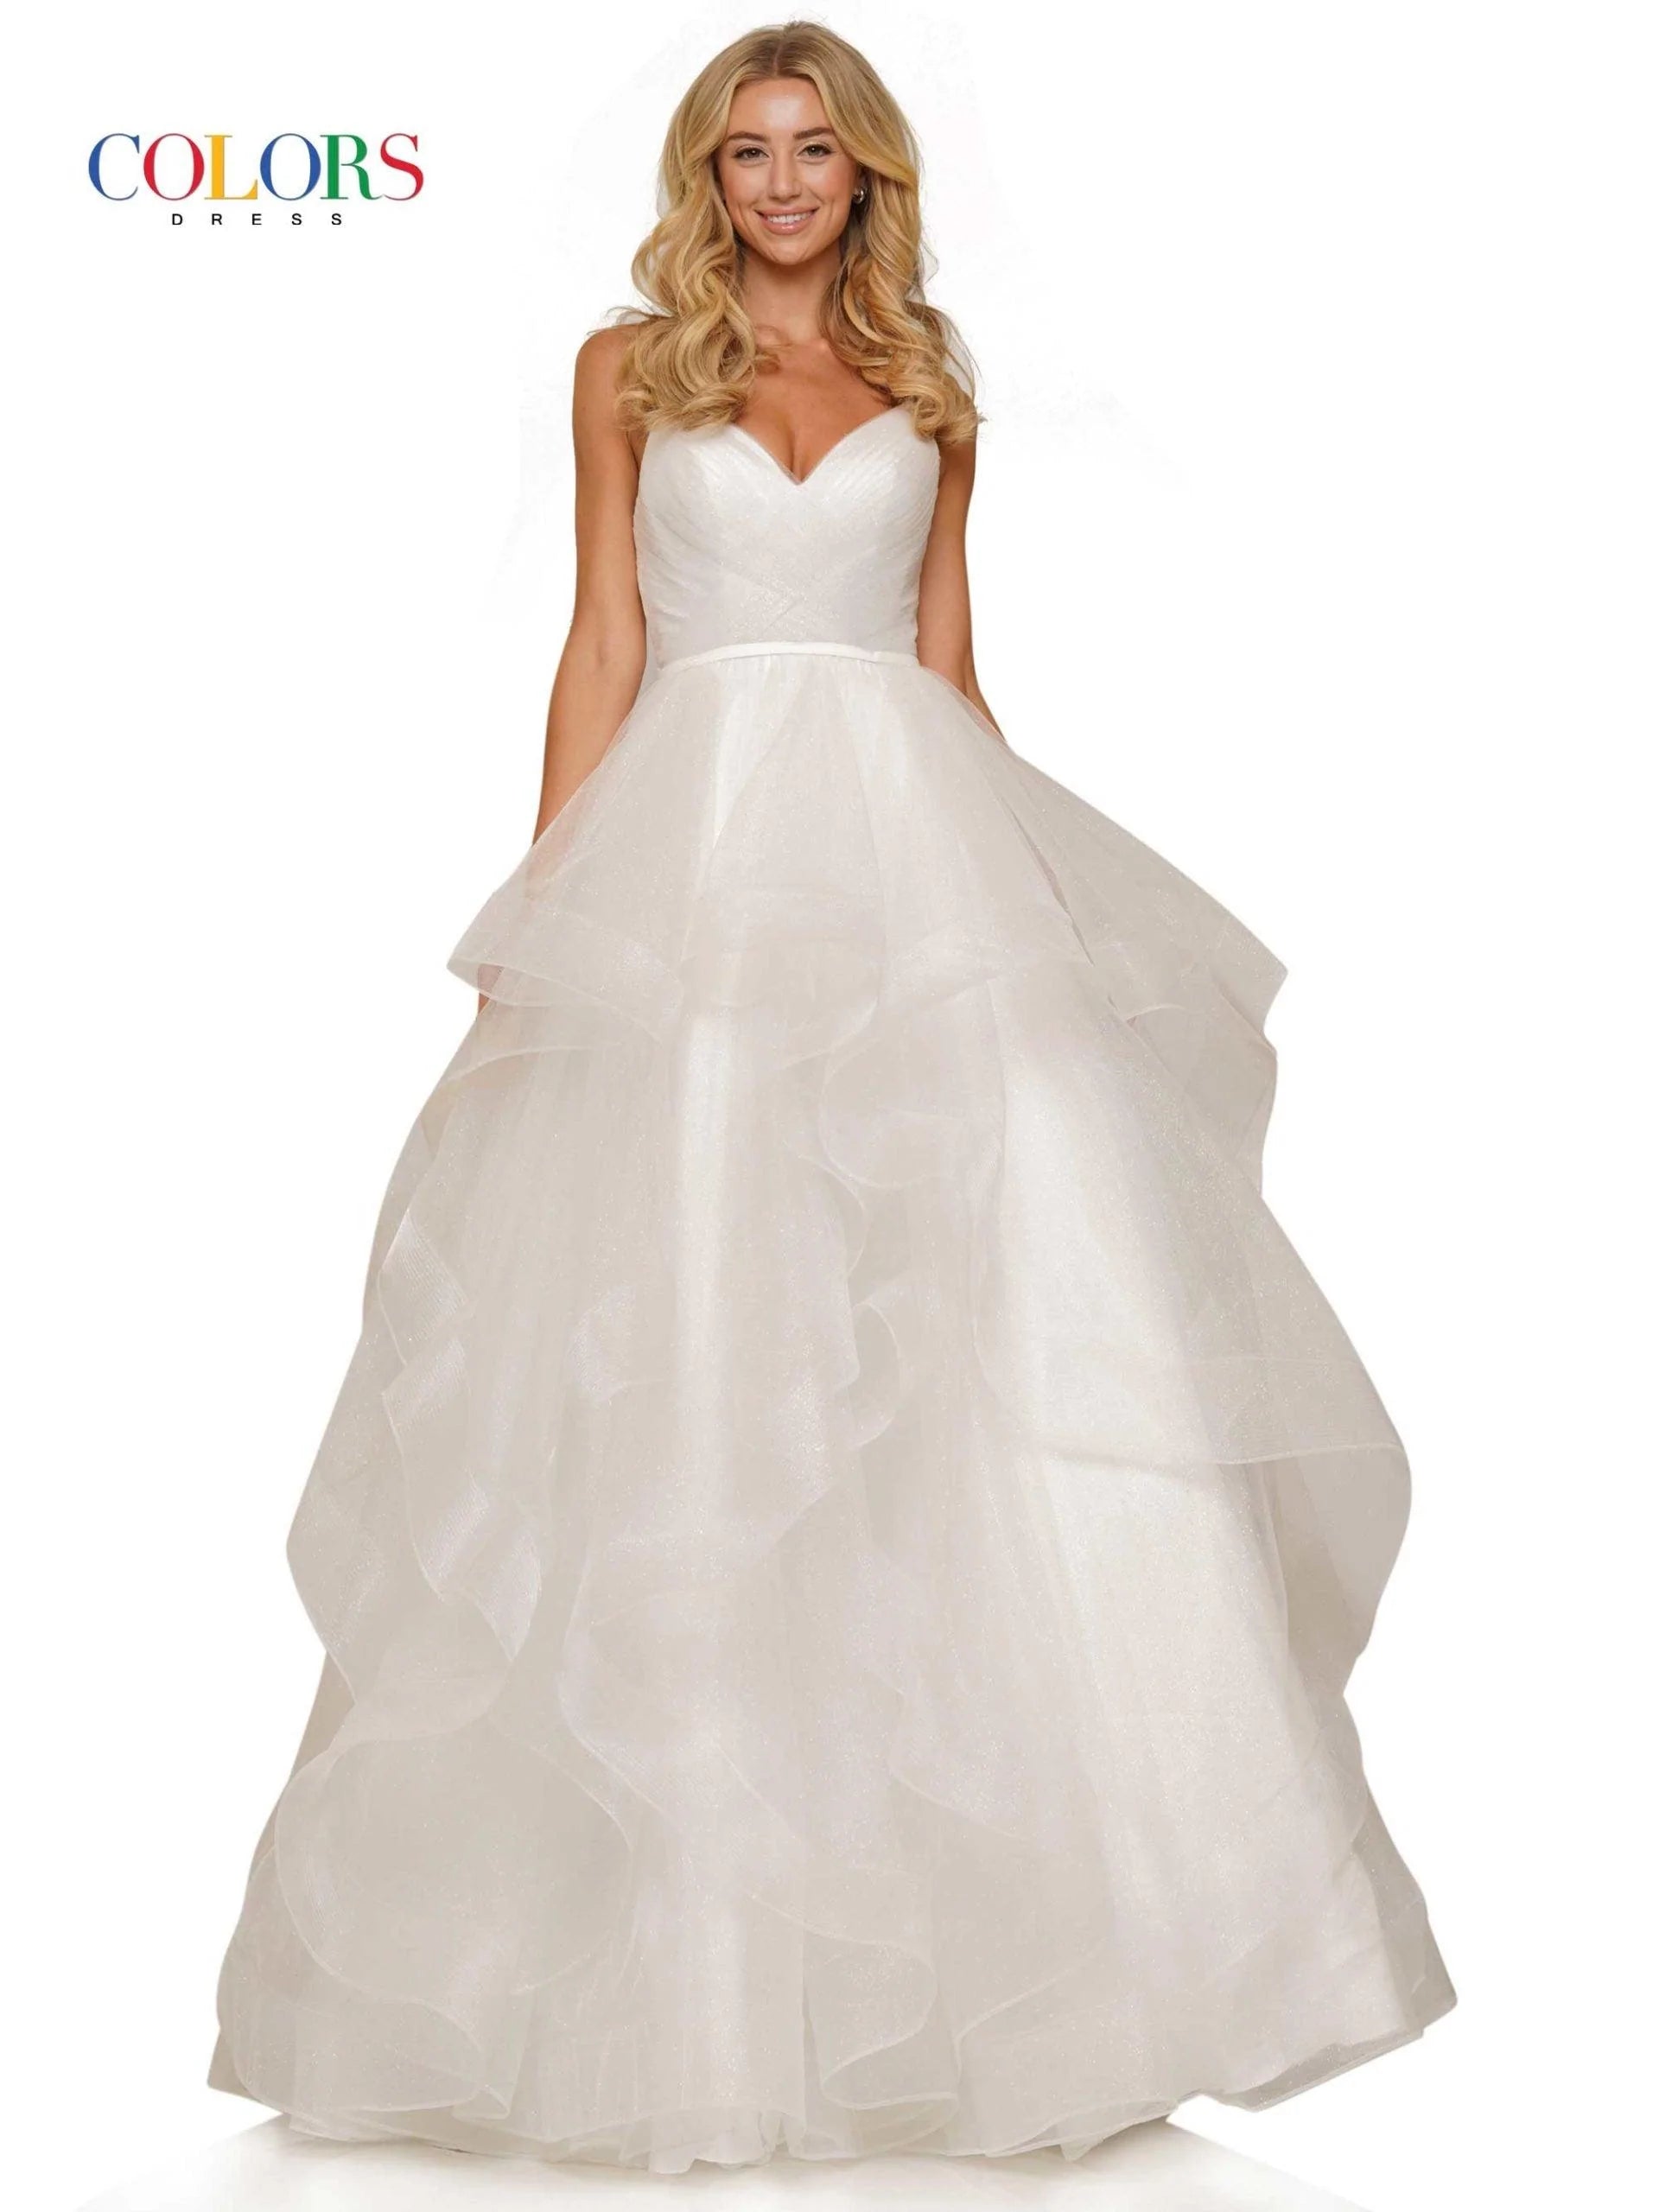 Colors Dress 2381  Off White Prom Dress Ballgown V Neckline Layered Glitter Tulle Pageant Gown